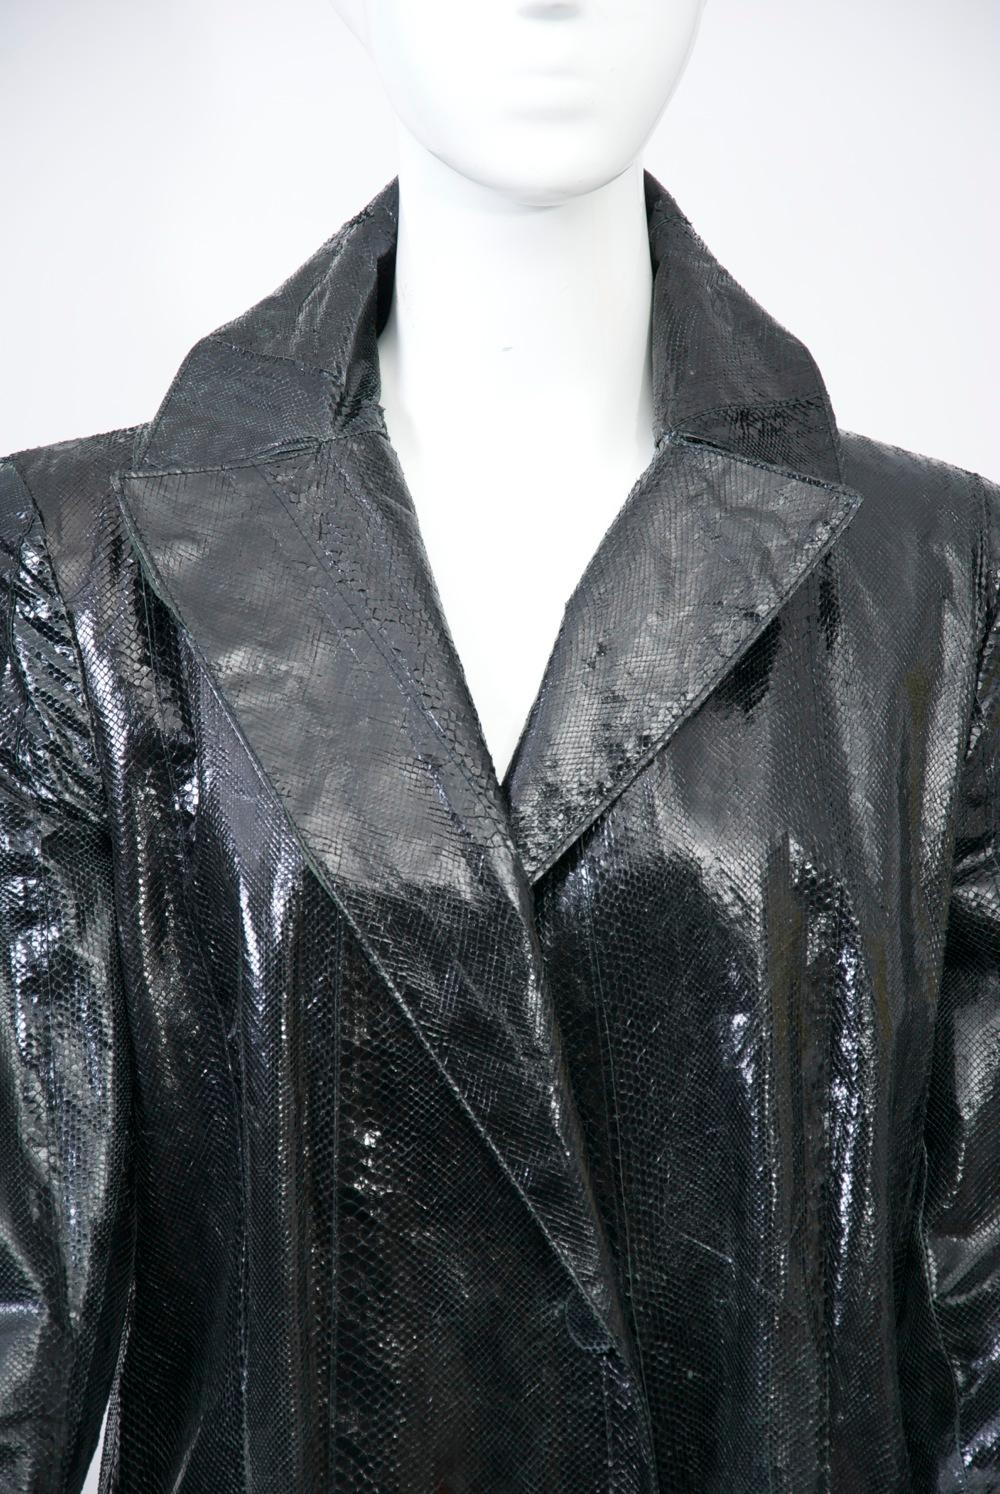 Genny snakeskin coat features a single-button closure and large pockets with flaps. Deep vent in back. Square shoulders. Lining is rayon/acetate. Approximate size M.